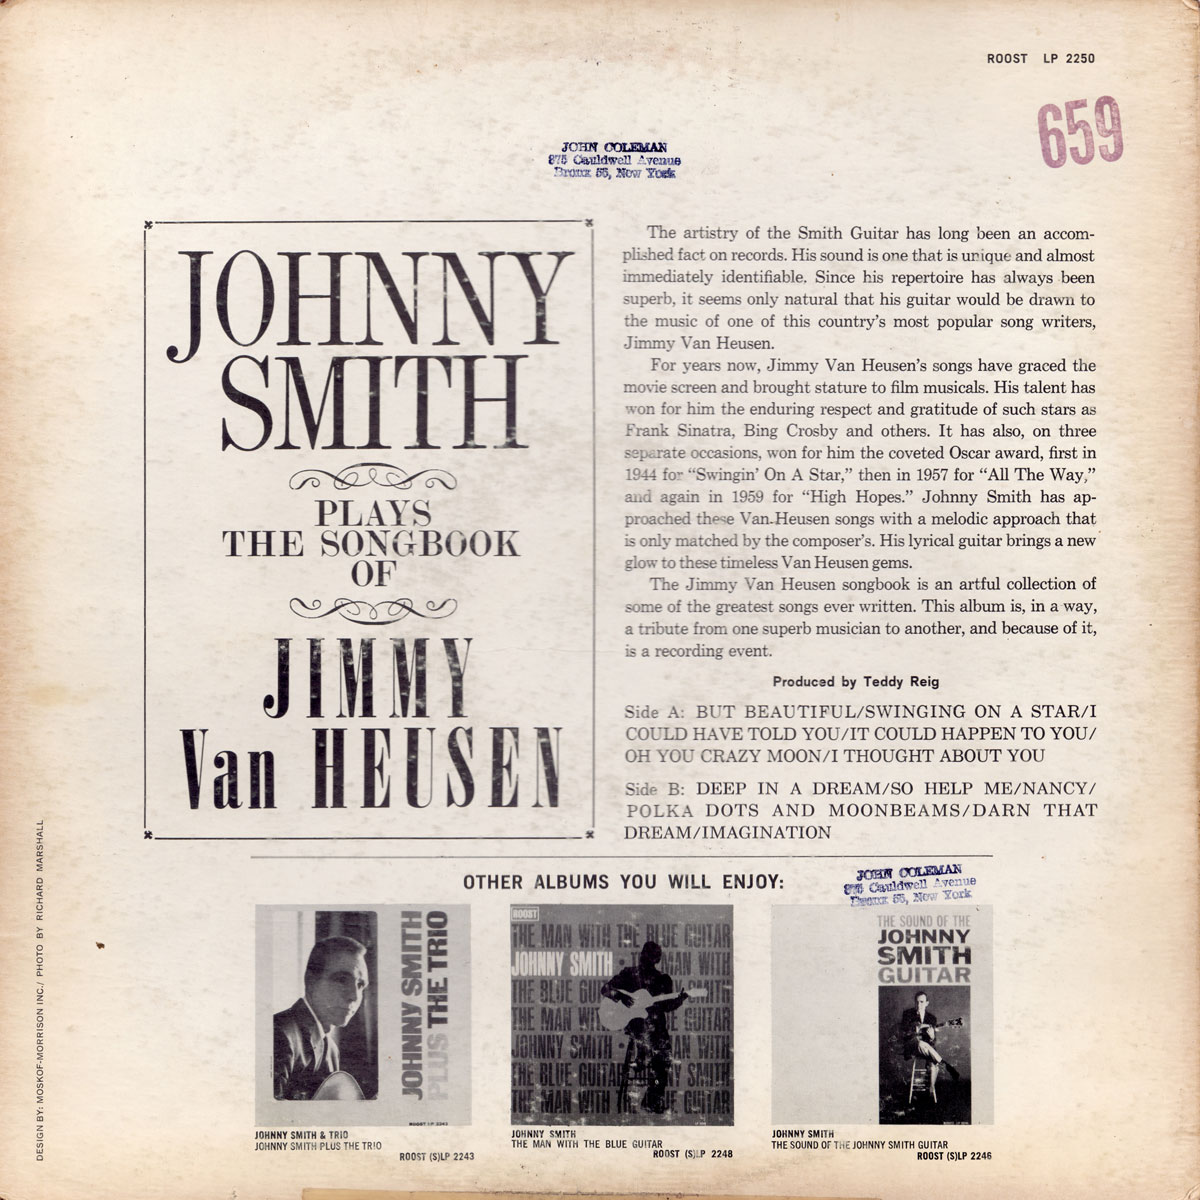 Johnny Smith - Plays The Songbook Of Jimmy Van Heusen - Back cover